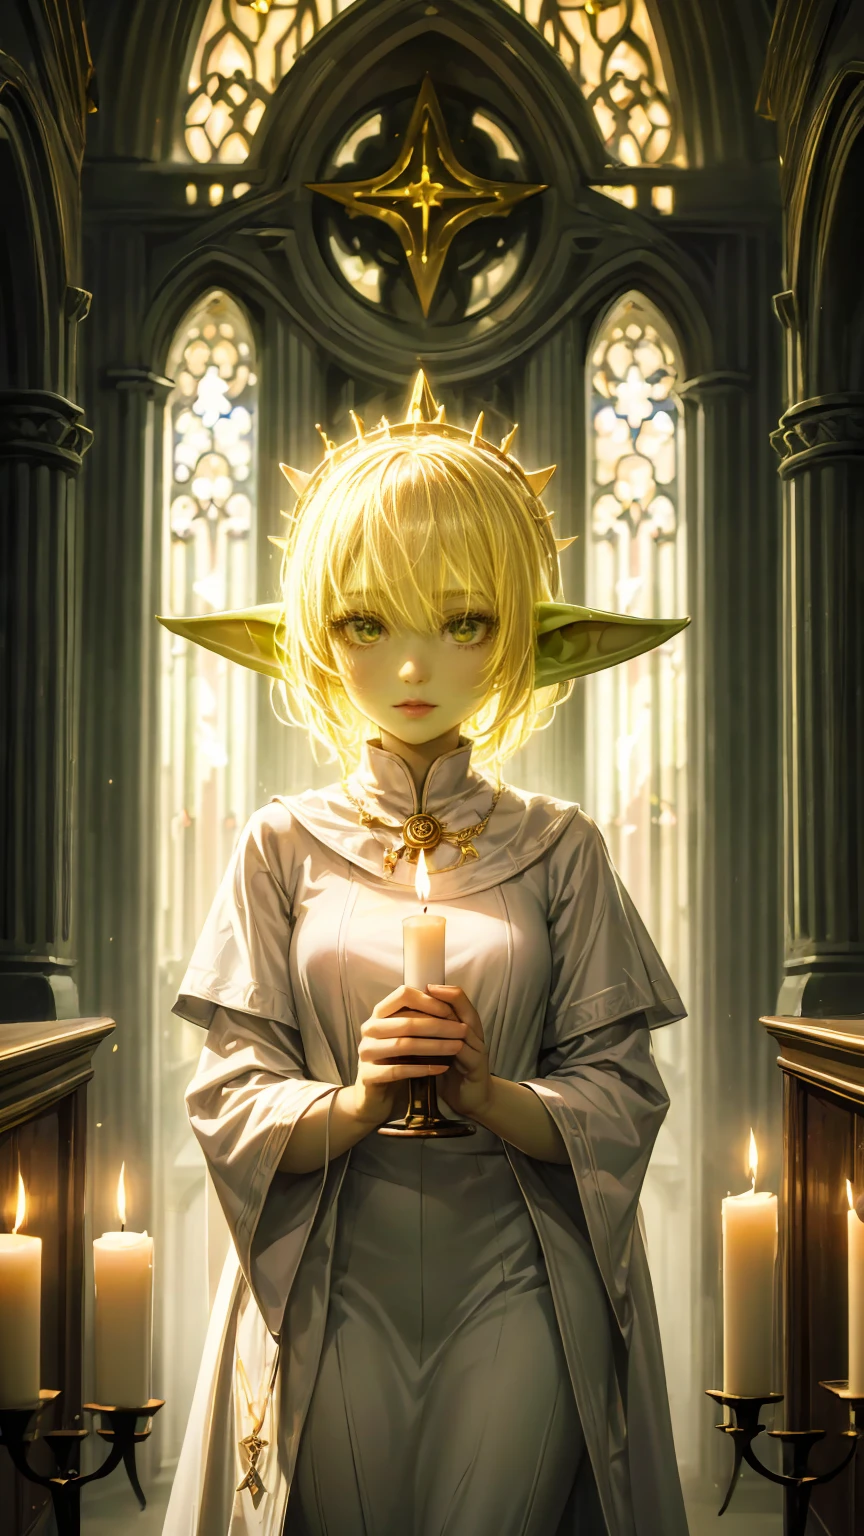 1 girl, green goblin girl, green skin, small pointy ears, priestess dressed in white, pious, lighting a candle in a cathedral, candlelit, warm lighting, soft lighting, reverent, radiant skin, blonde hair, luminous hair